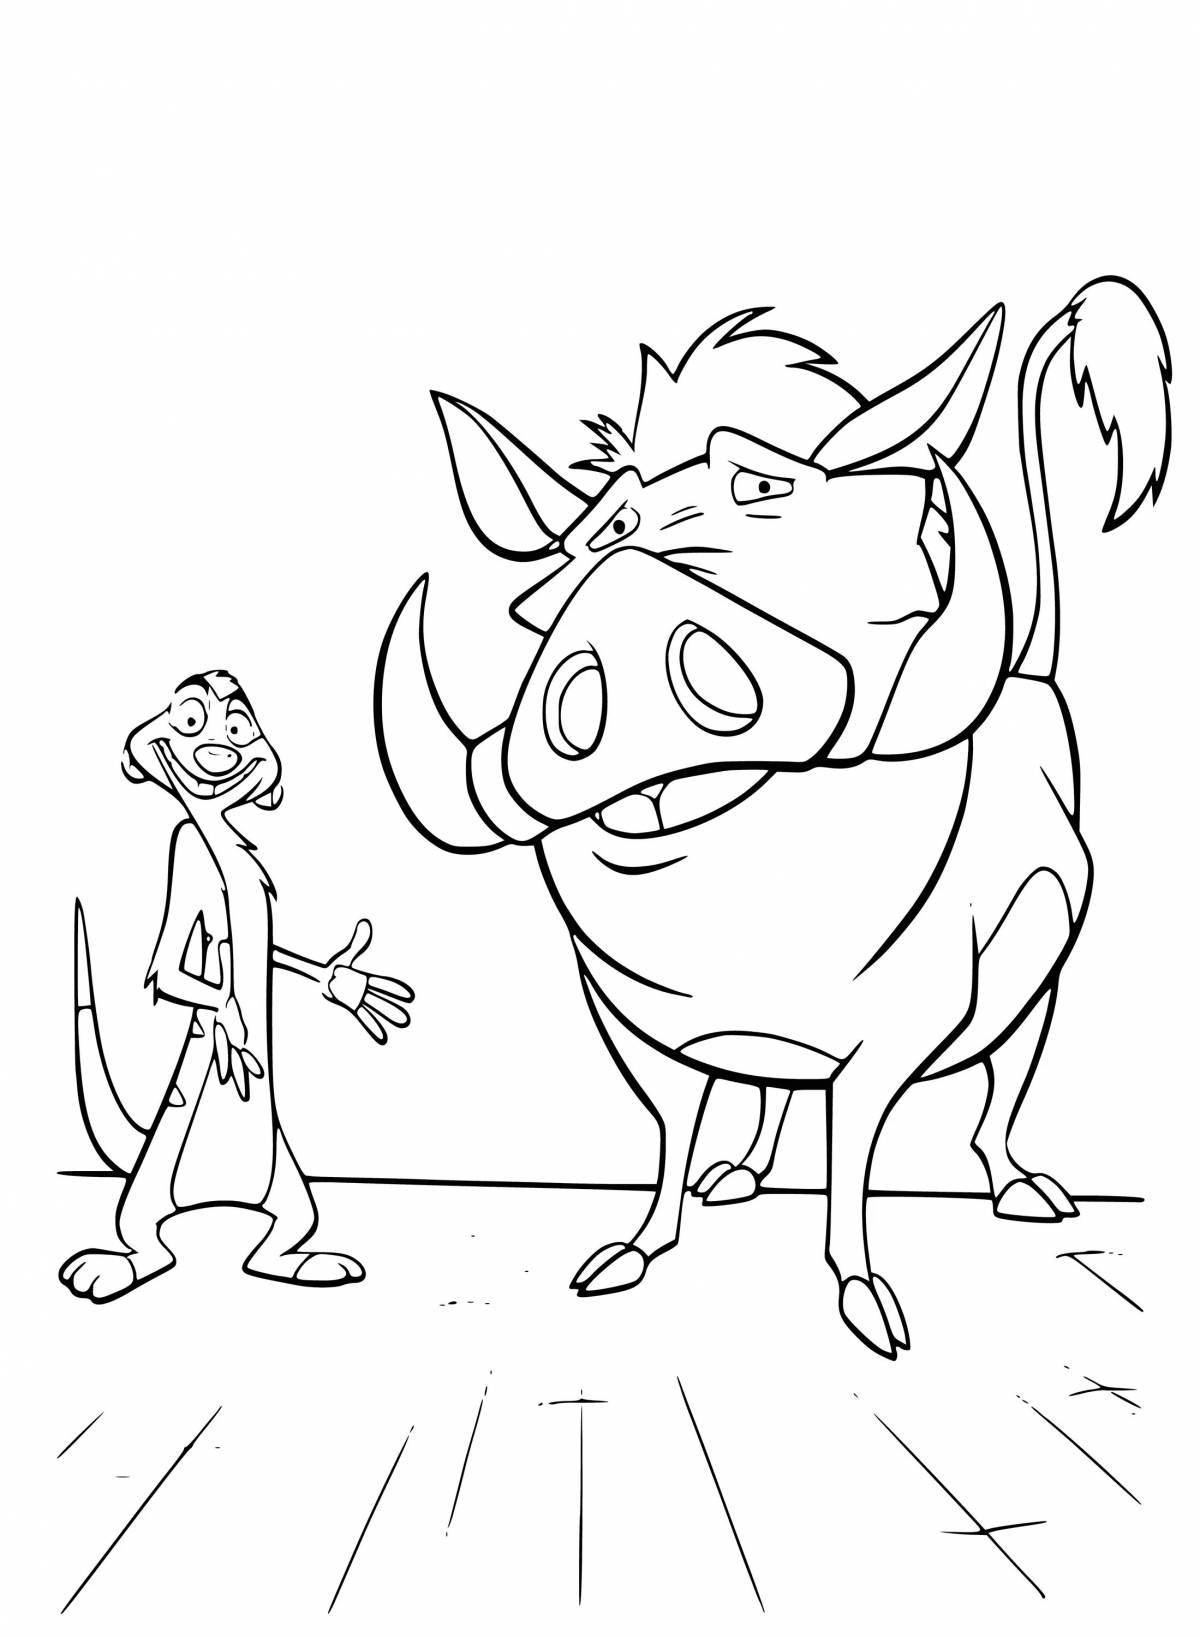 Bright pumba coloring page